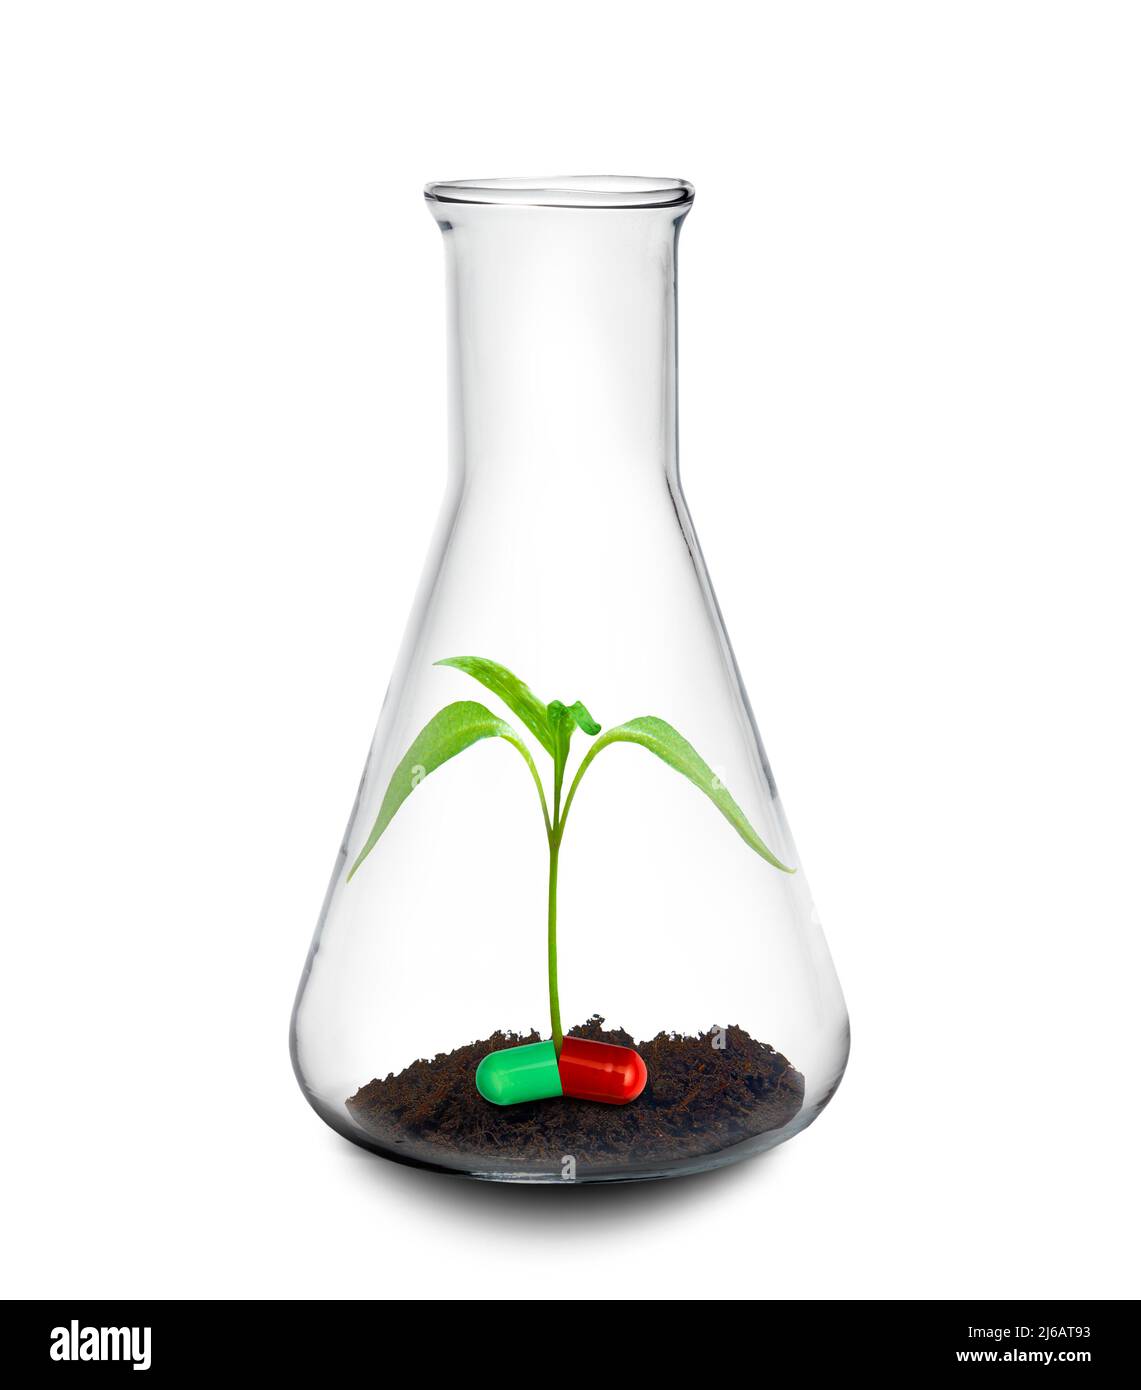 Botanical research for new drugs, conceptual image Stock Photo